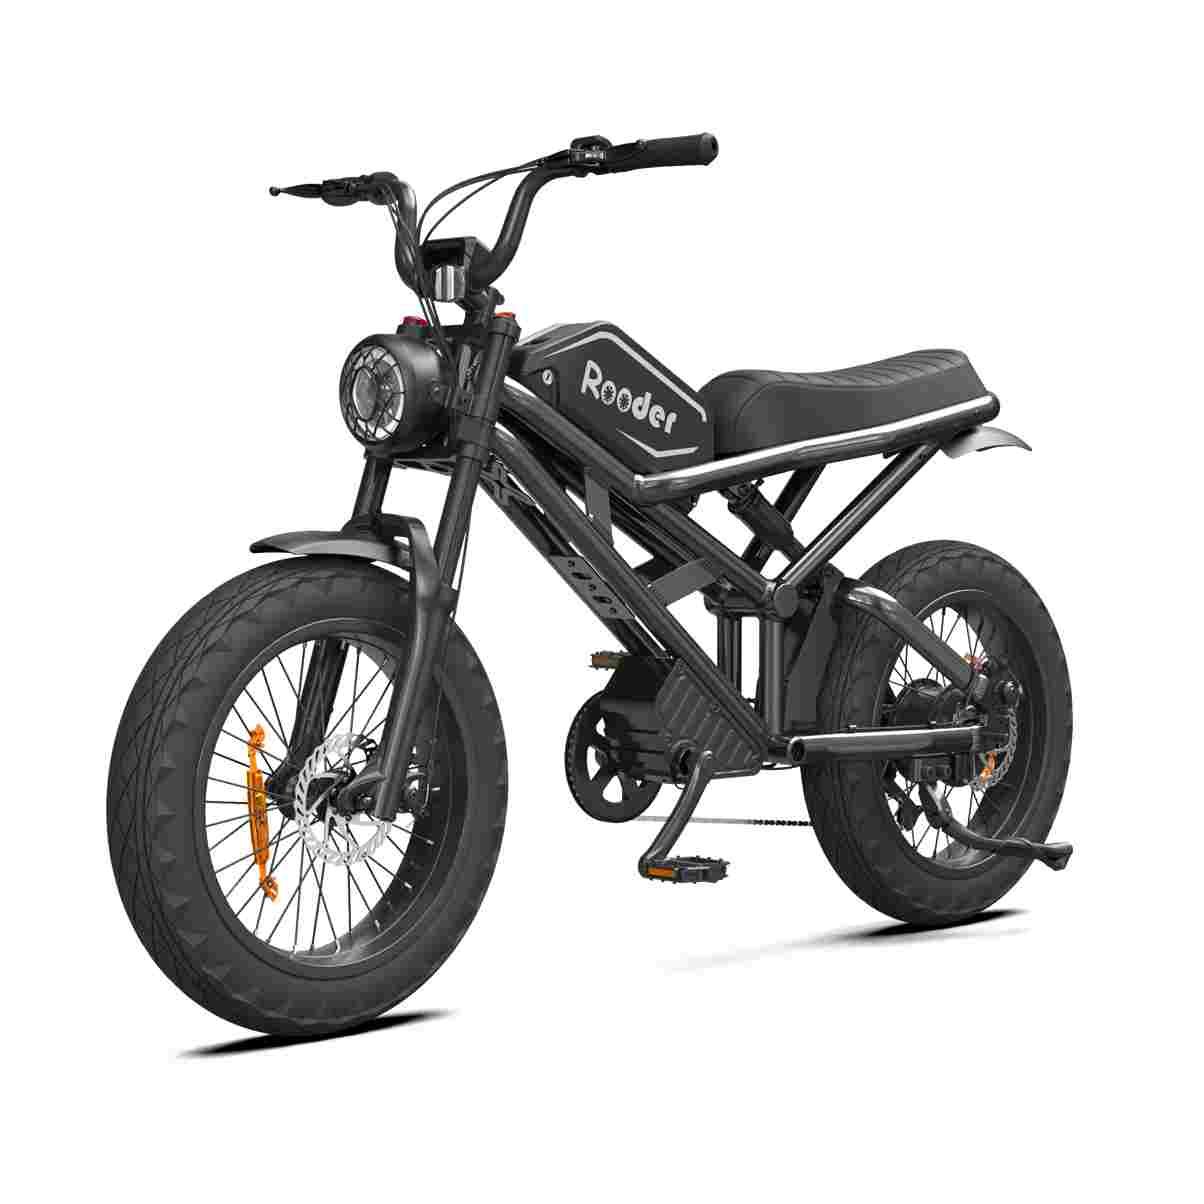 Street Legal Electric Motorcycle For Adults wholesale price